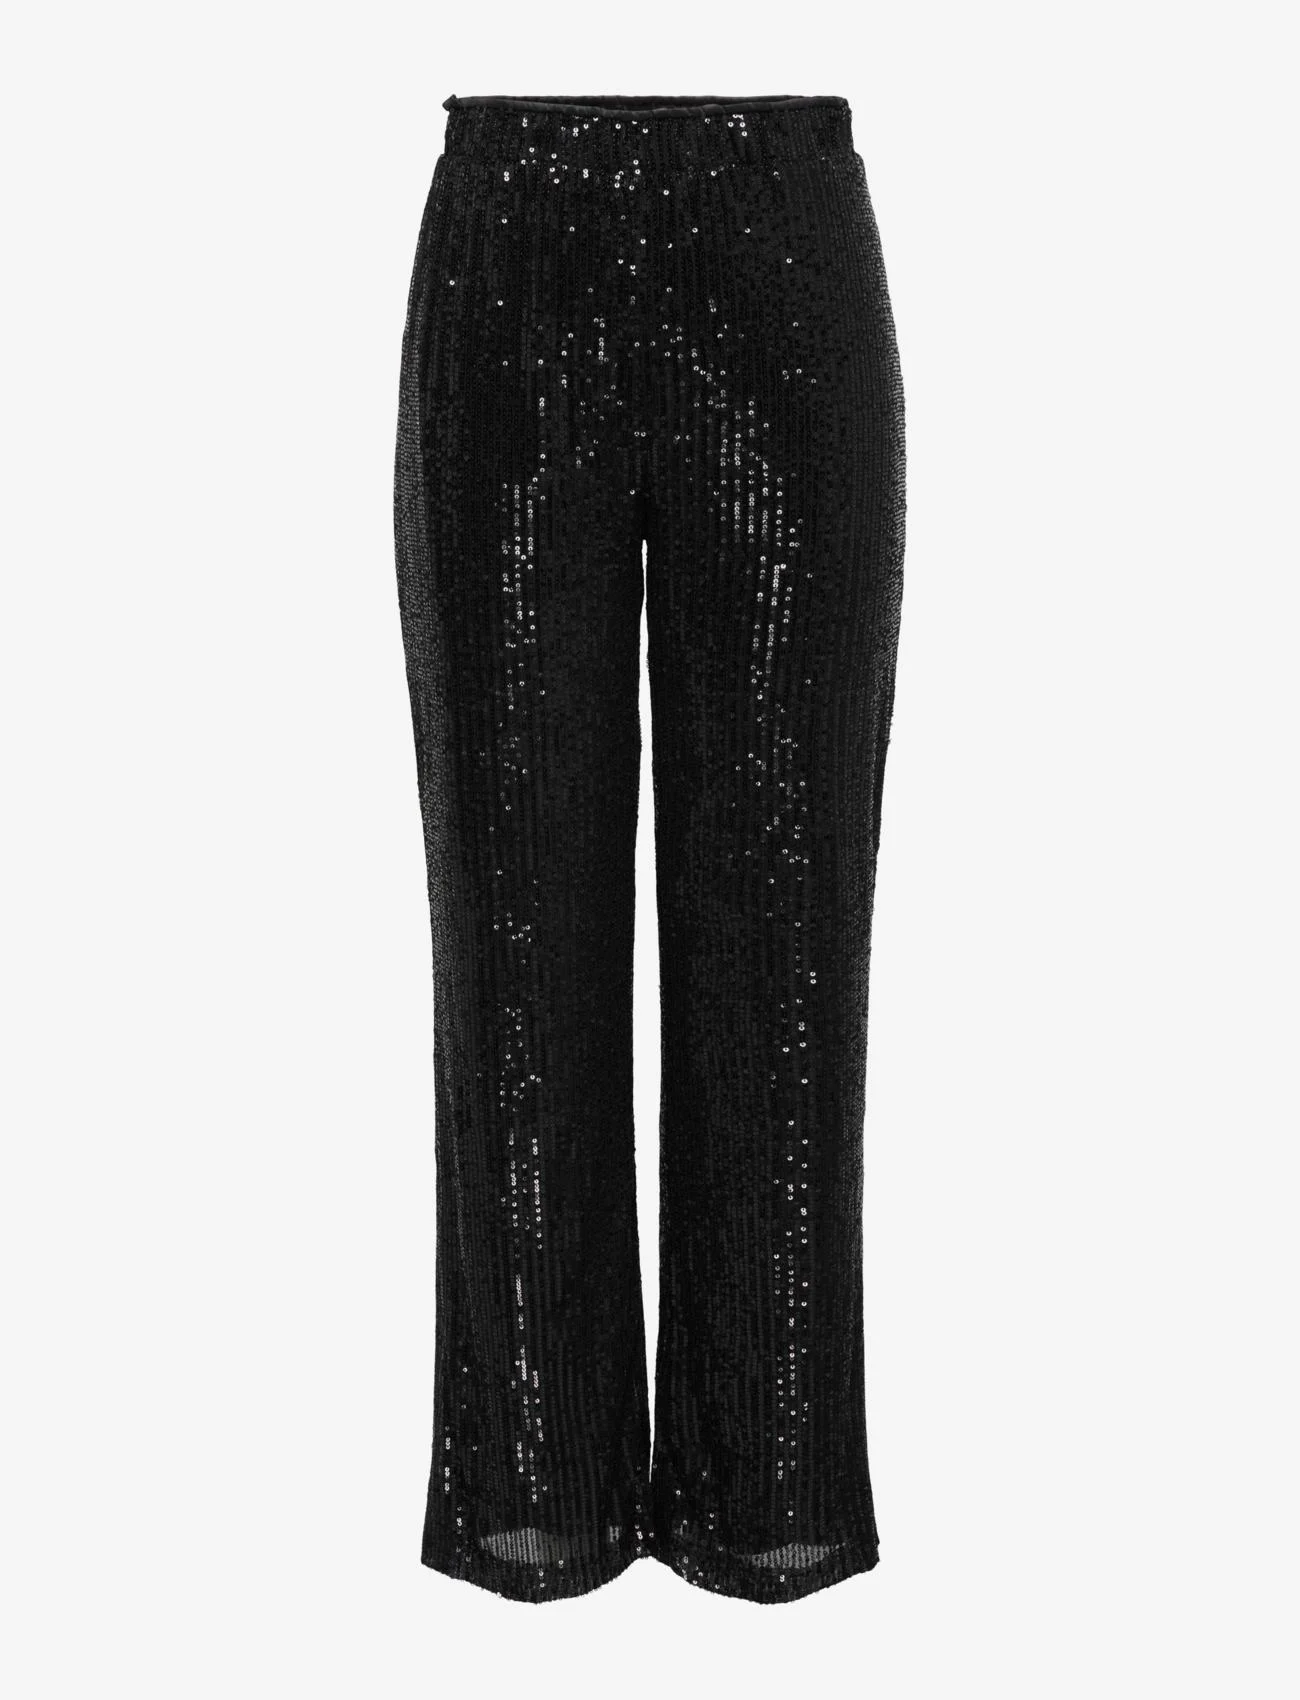 ONLY - ONLGOLDIE WIDE PANT WVN - leveälahkeiset housut - black - 0